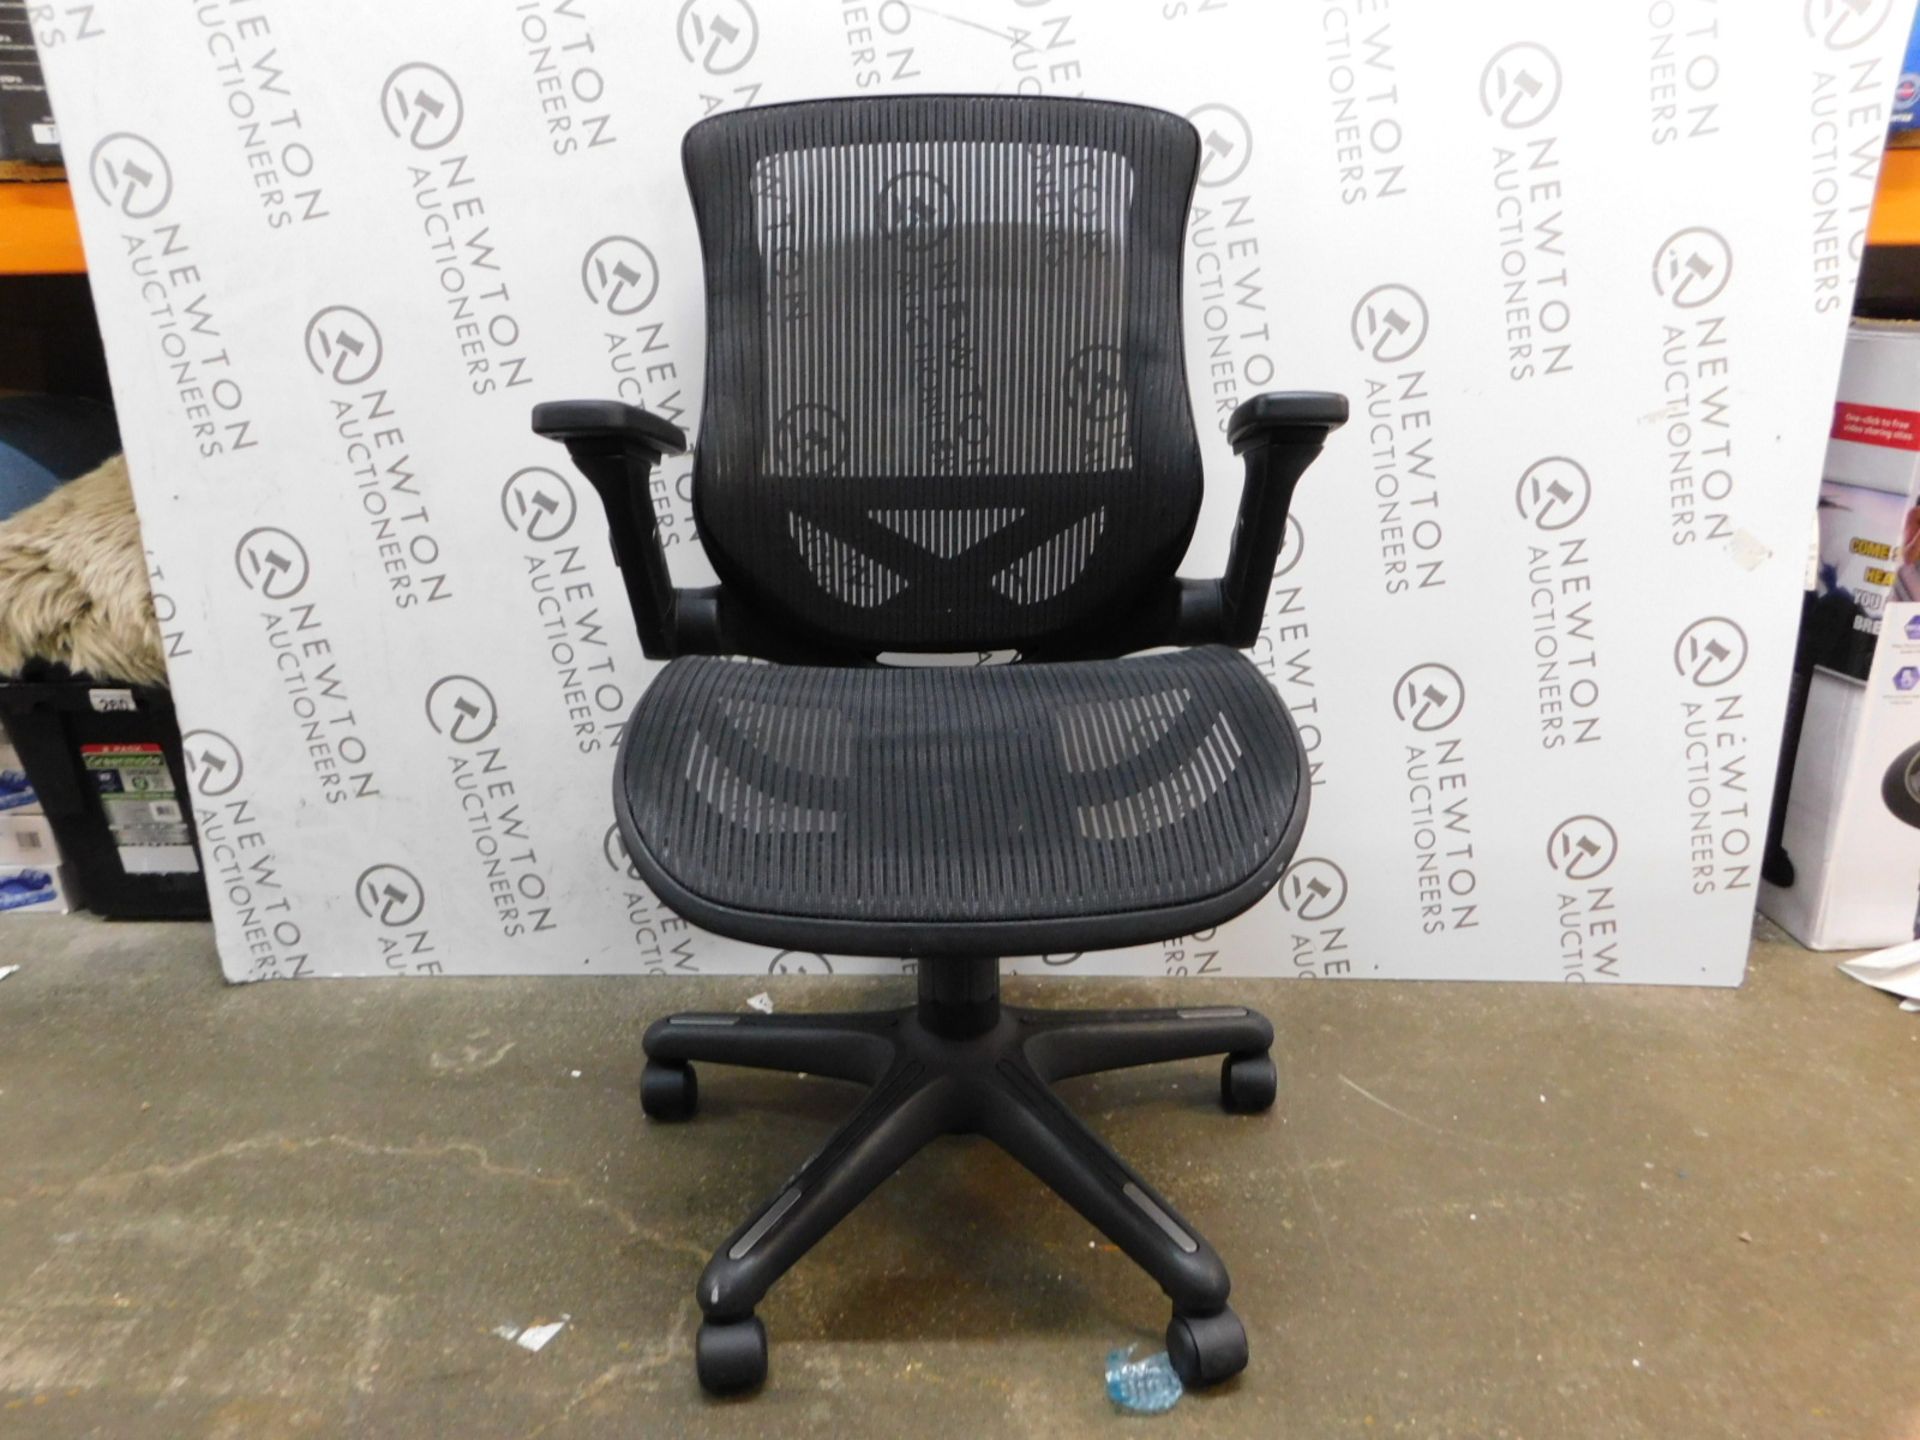 1 BAYSIDE FURNISHINGS METREX BLACK MESH OFFICE CHAIR RRP Â£129.99 (MISSING NUTS FOR BACK REST)